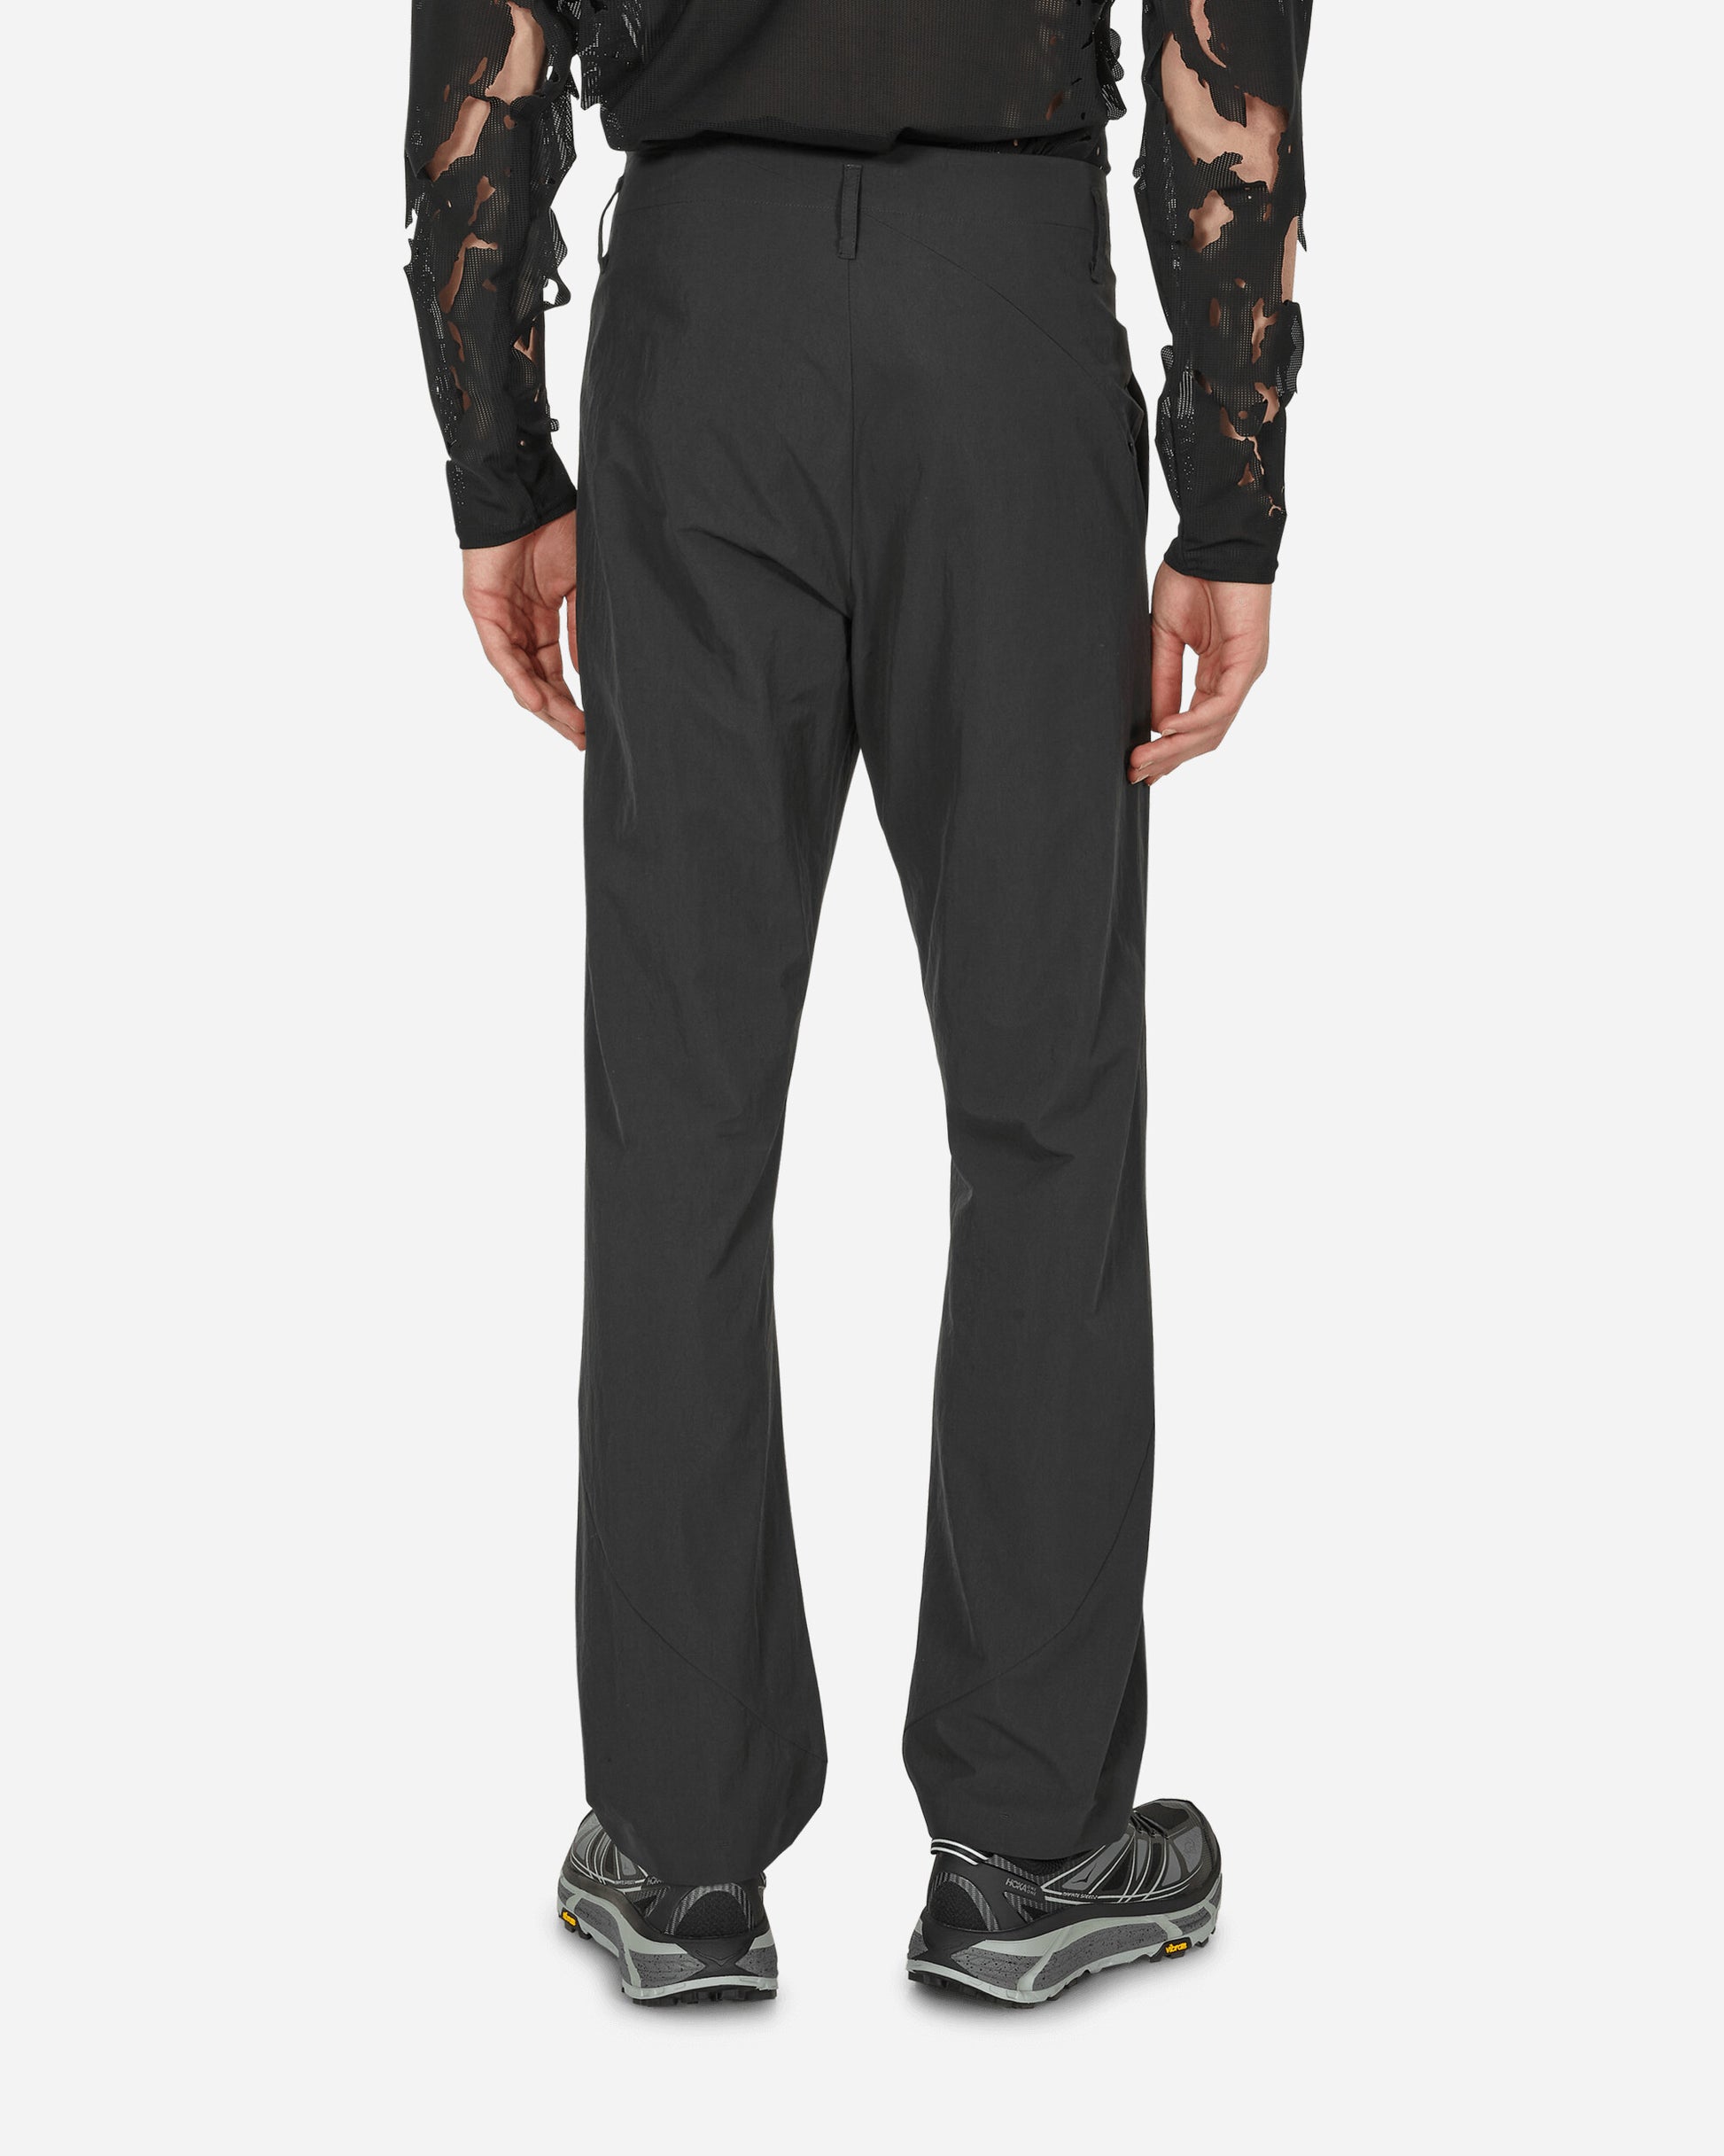 Post Archive Faction (PAF) 6.0 Trousers Right Black Pants Trousers 60BTRB  BLACK 